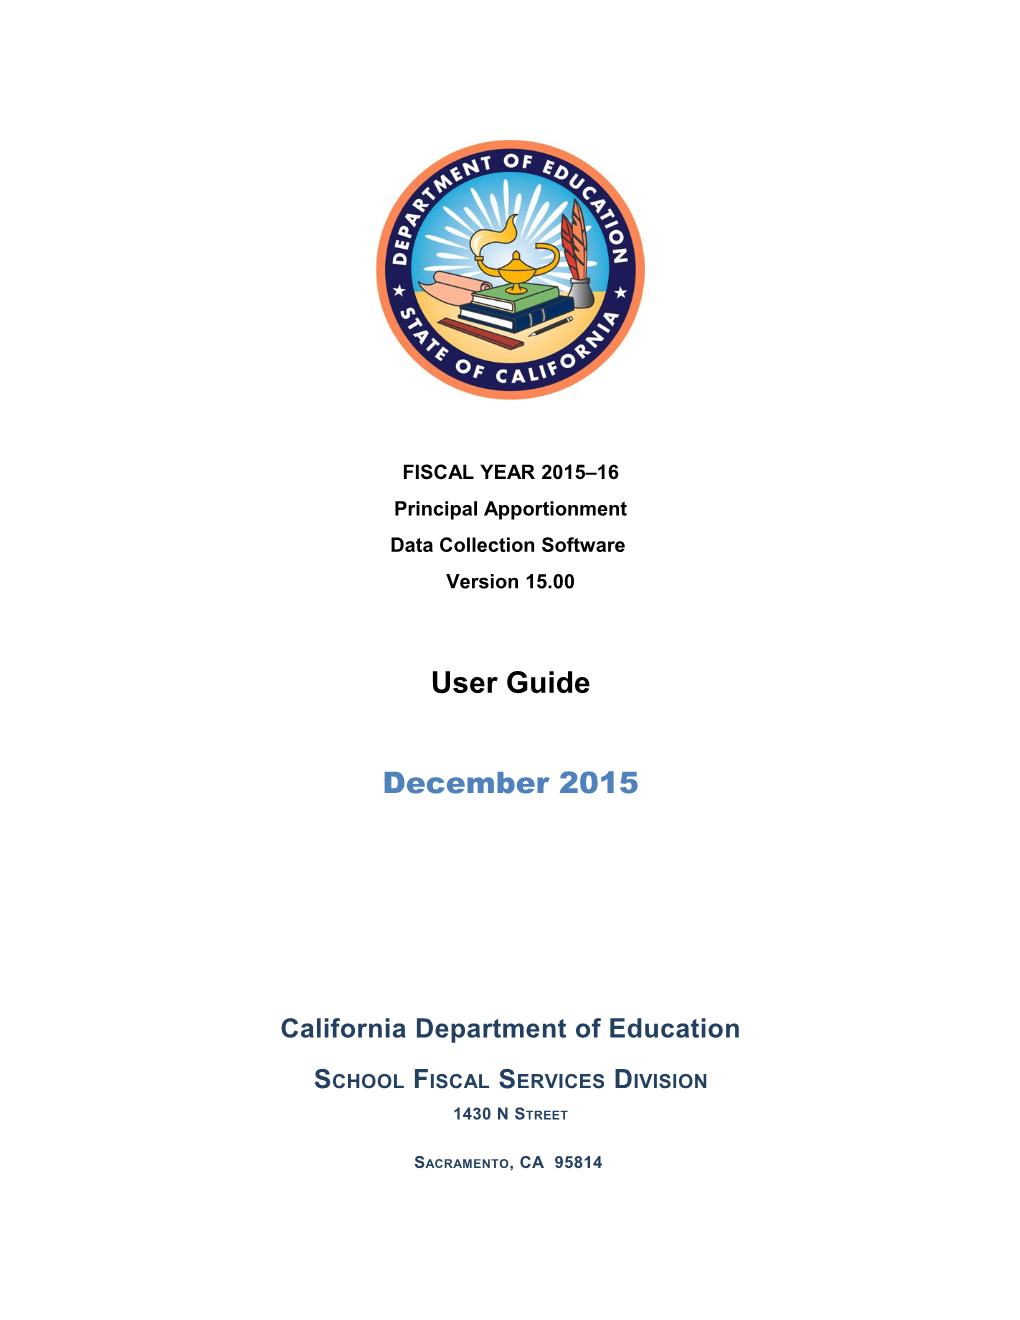 PA Software User Guide, FY 2015-16 - Principal Apportionment (CA Dept of Education)